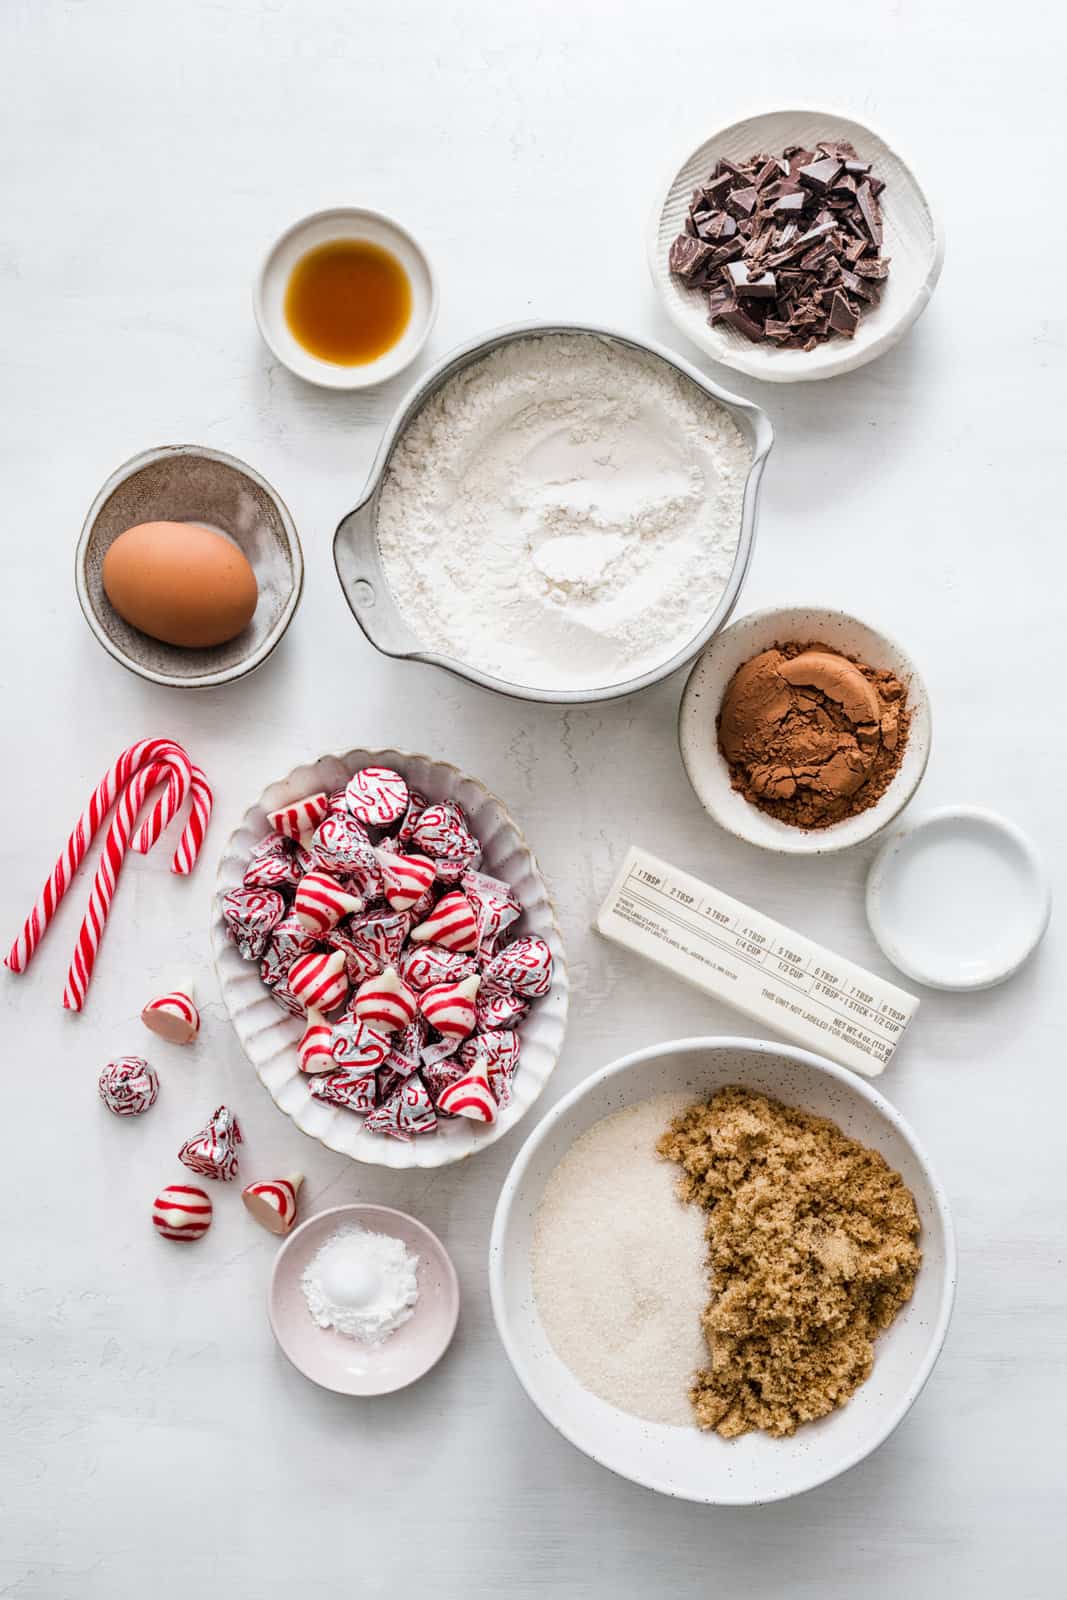 Ingredients needed: semi-sweet chocolate, unsalted butter, granulated sugar, light brown sugar, egg, vanilla extract, peppermint extract, all-purpose flour, unsweetened cocoa powder, baking powder, salt, crushed candy canes (optional) and Hershey’s candy cane kisses.